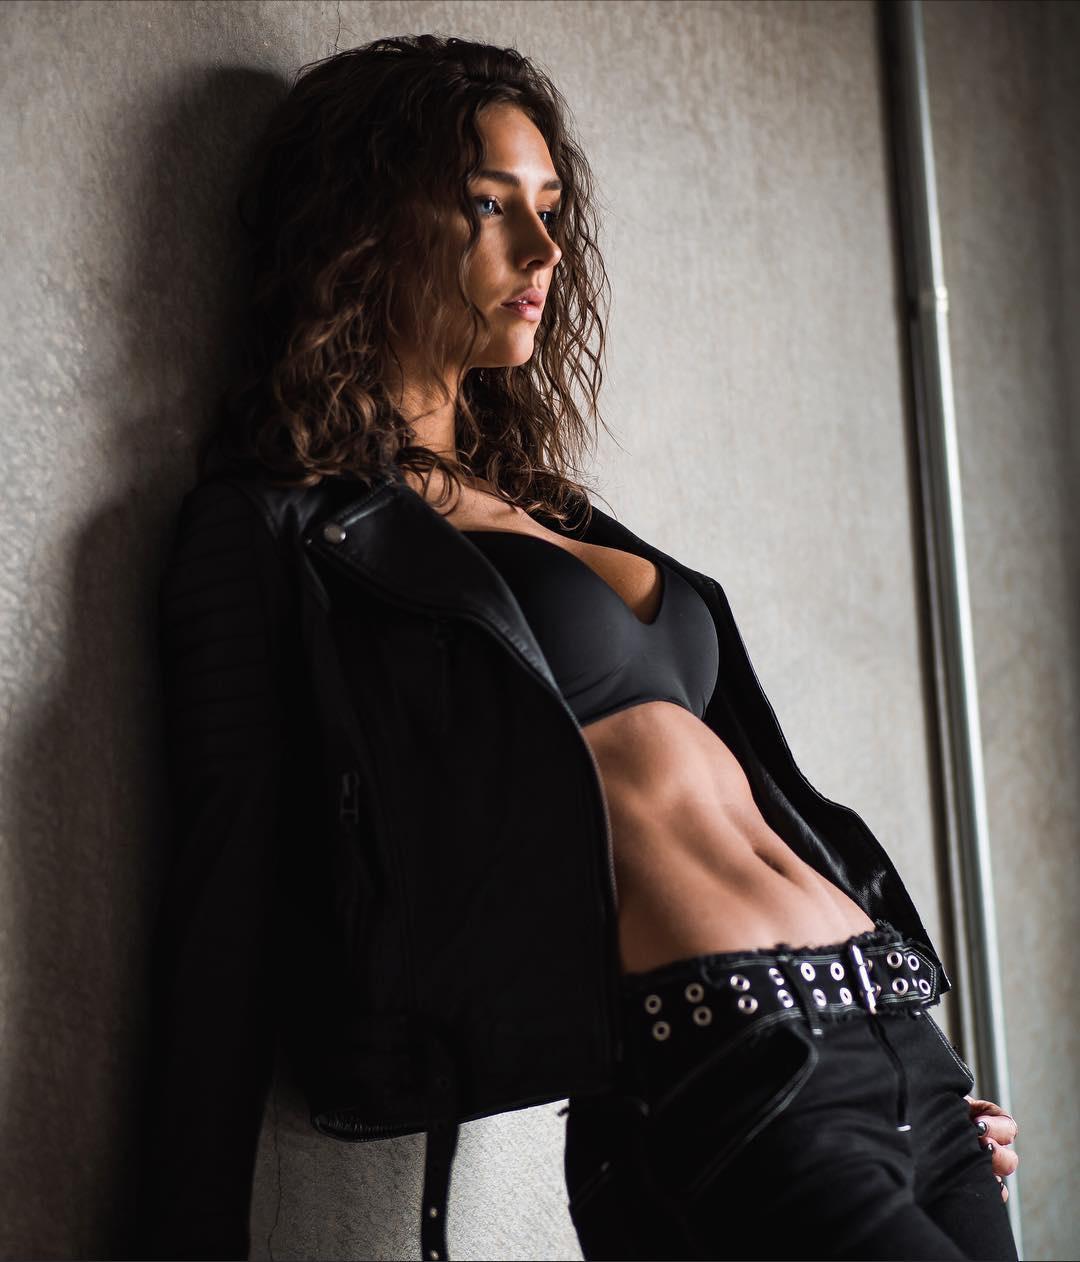 Hot Rachel Cook Abs Pictures, Gym Babes: gym,  Perfect Abs Girl,  Girls Abs,  Girl With Abs,  Girl Toned Stomach,  Babes,  Teen Girl Abs,  Cute Girls Abs  